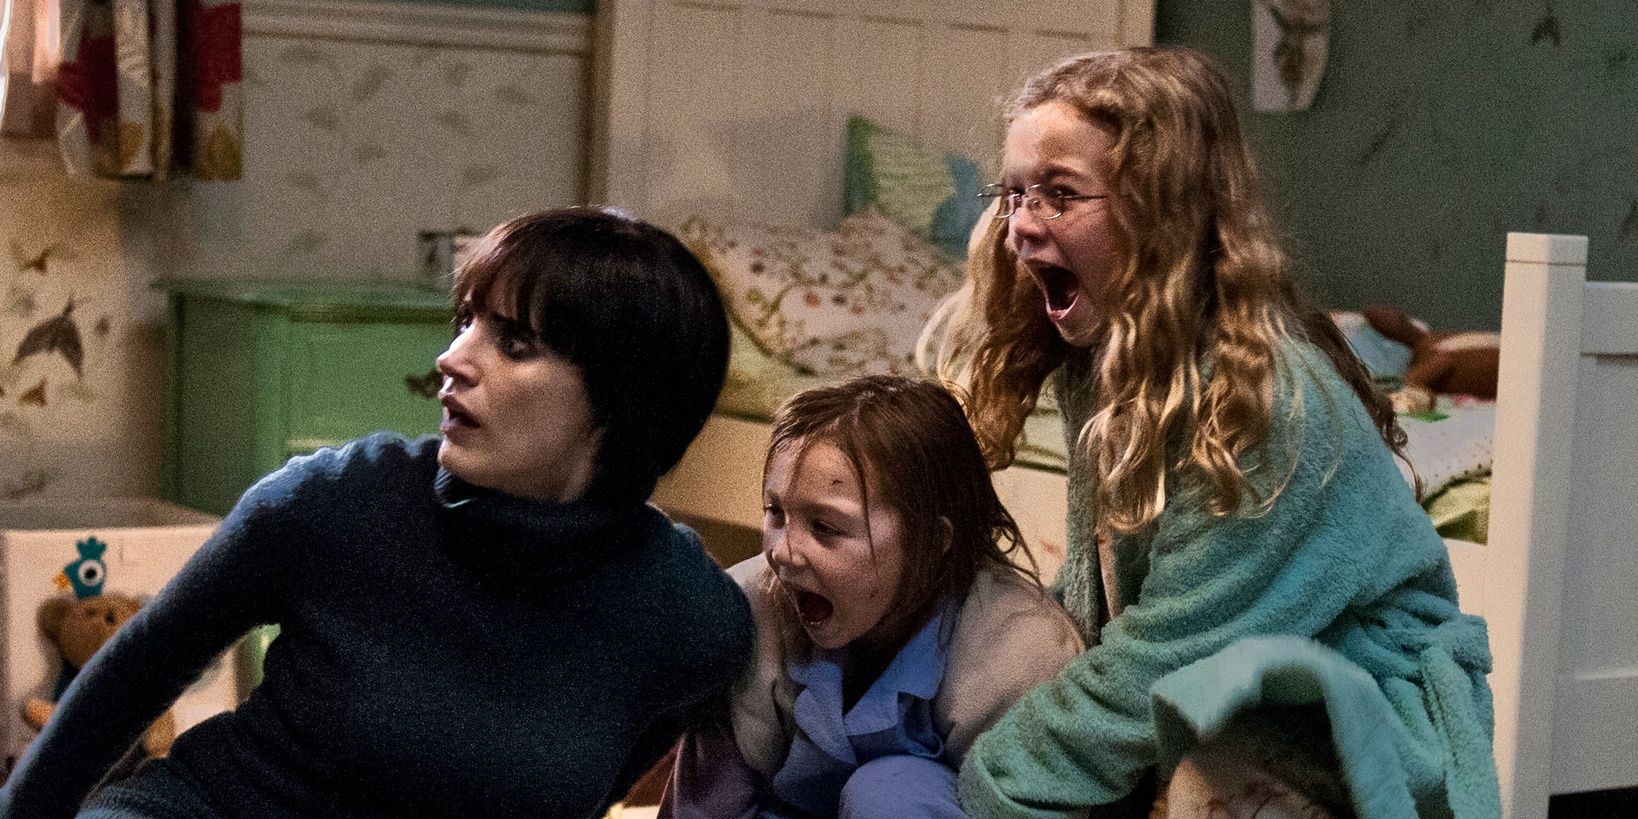 Chastain's horror film Mama takes big box office win